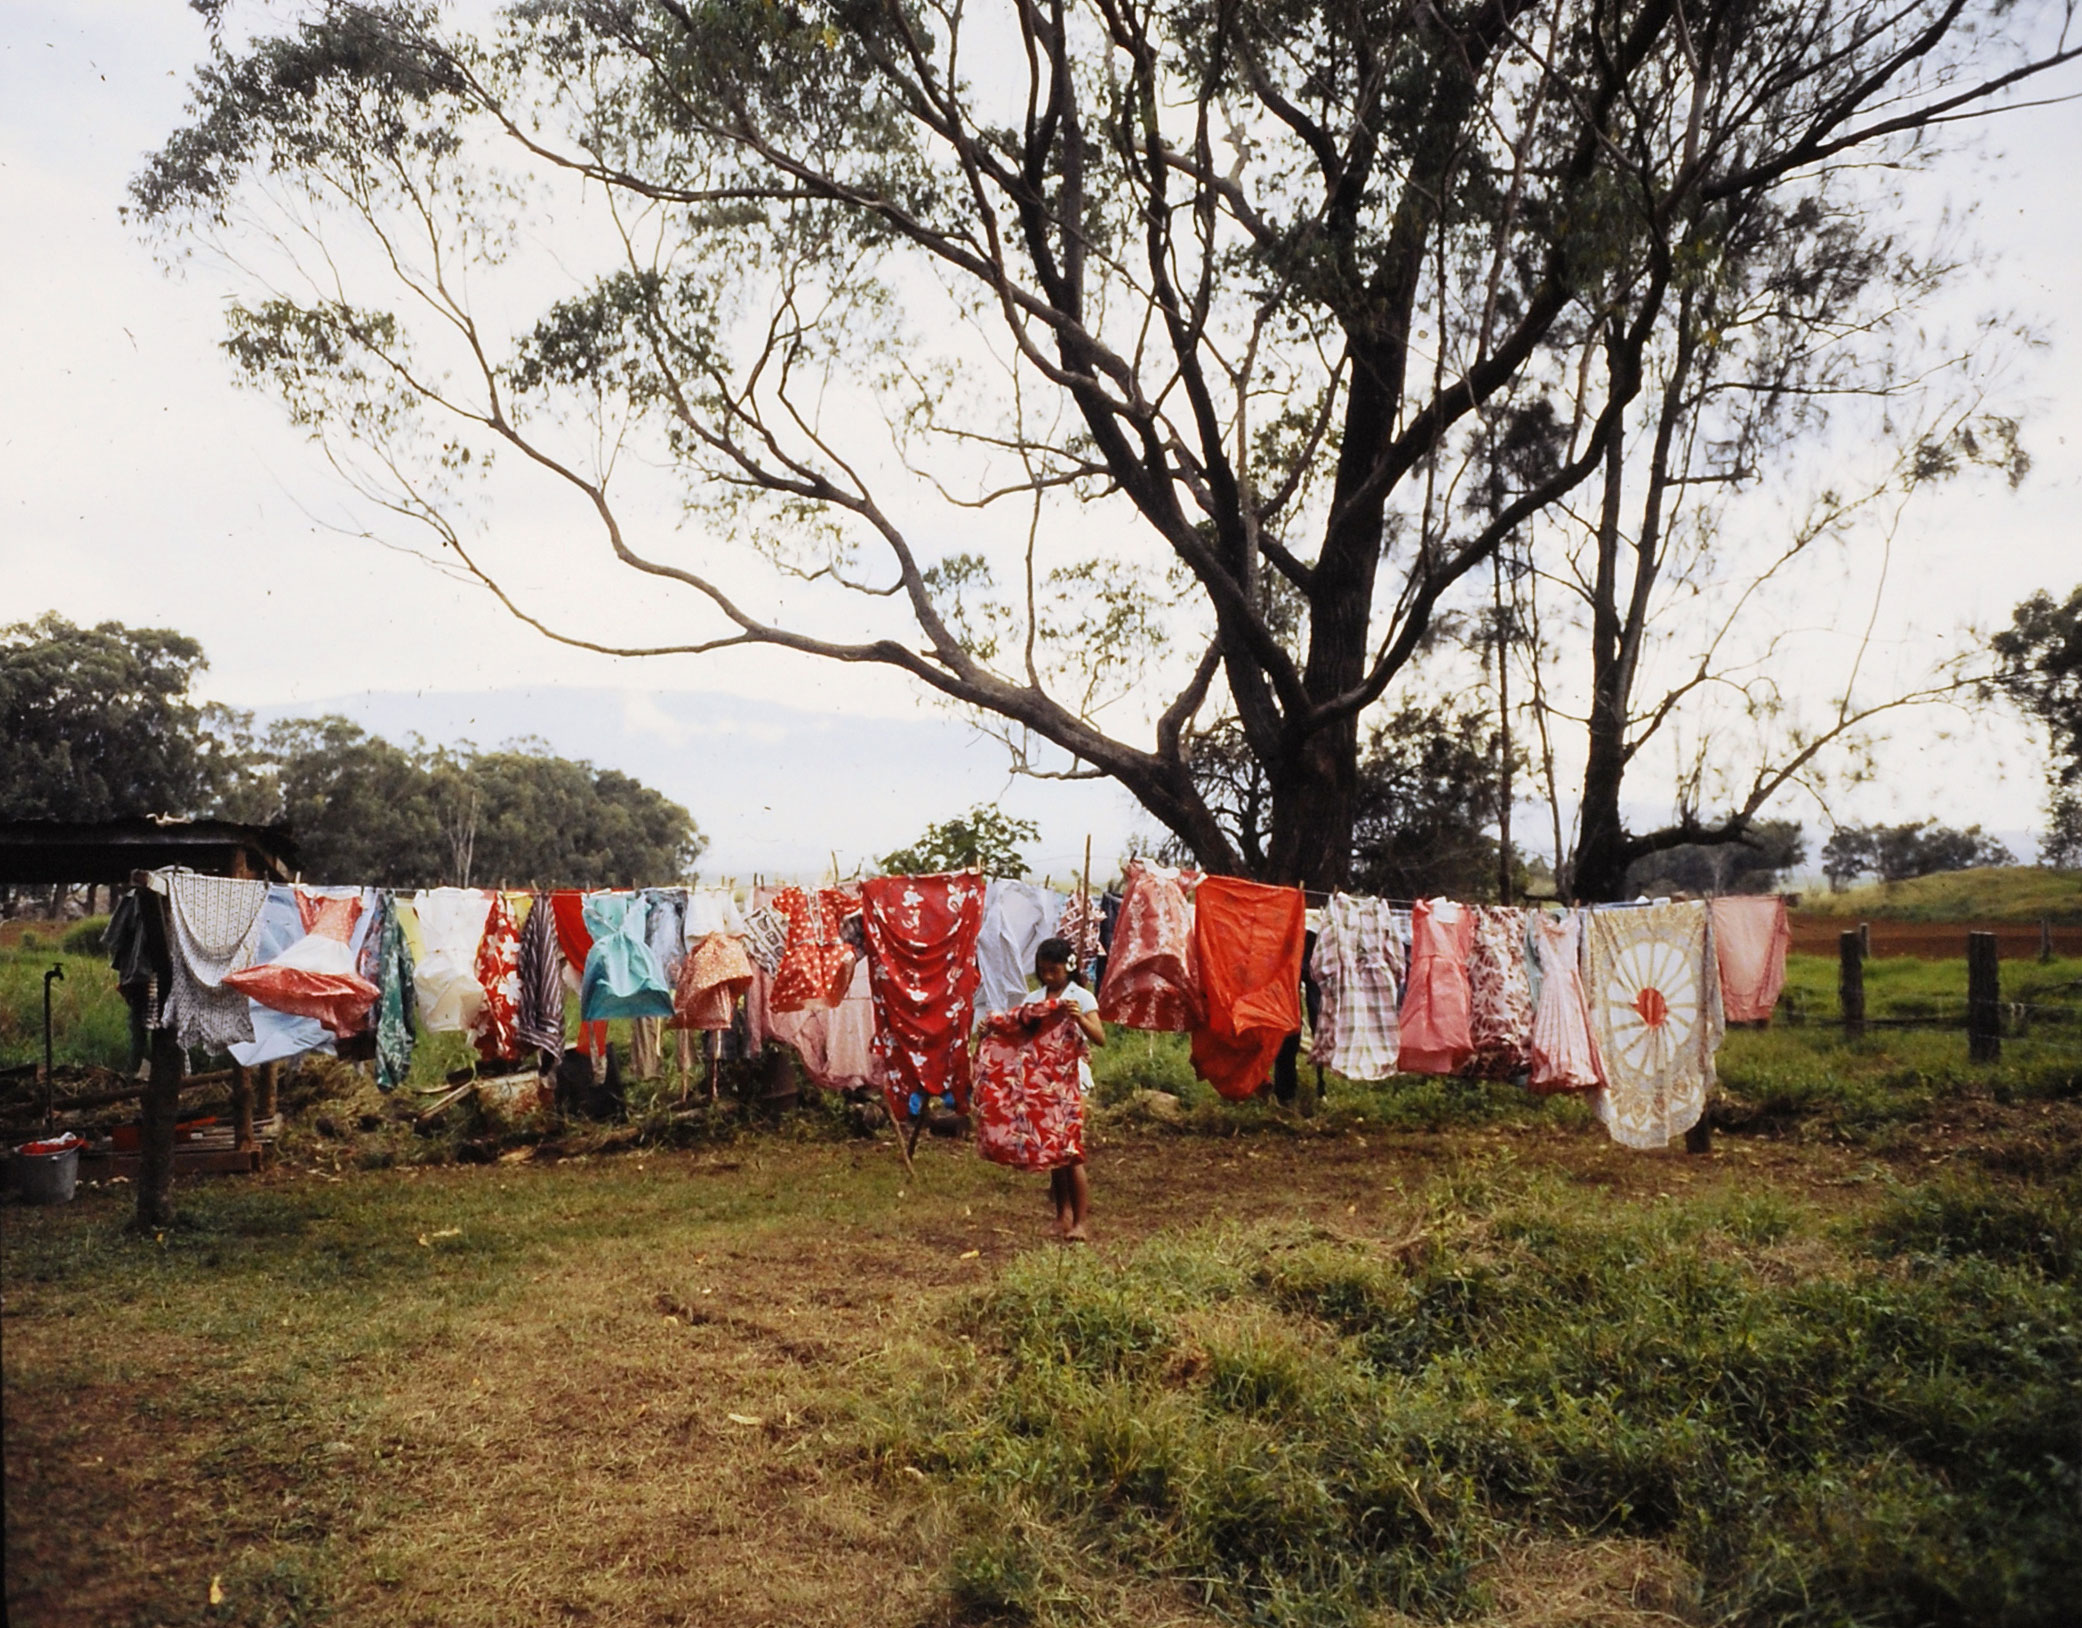 Washing hung out to dry, Hawaii, 1959.